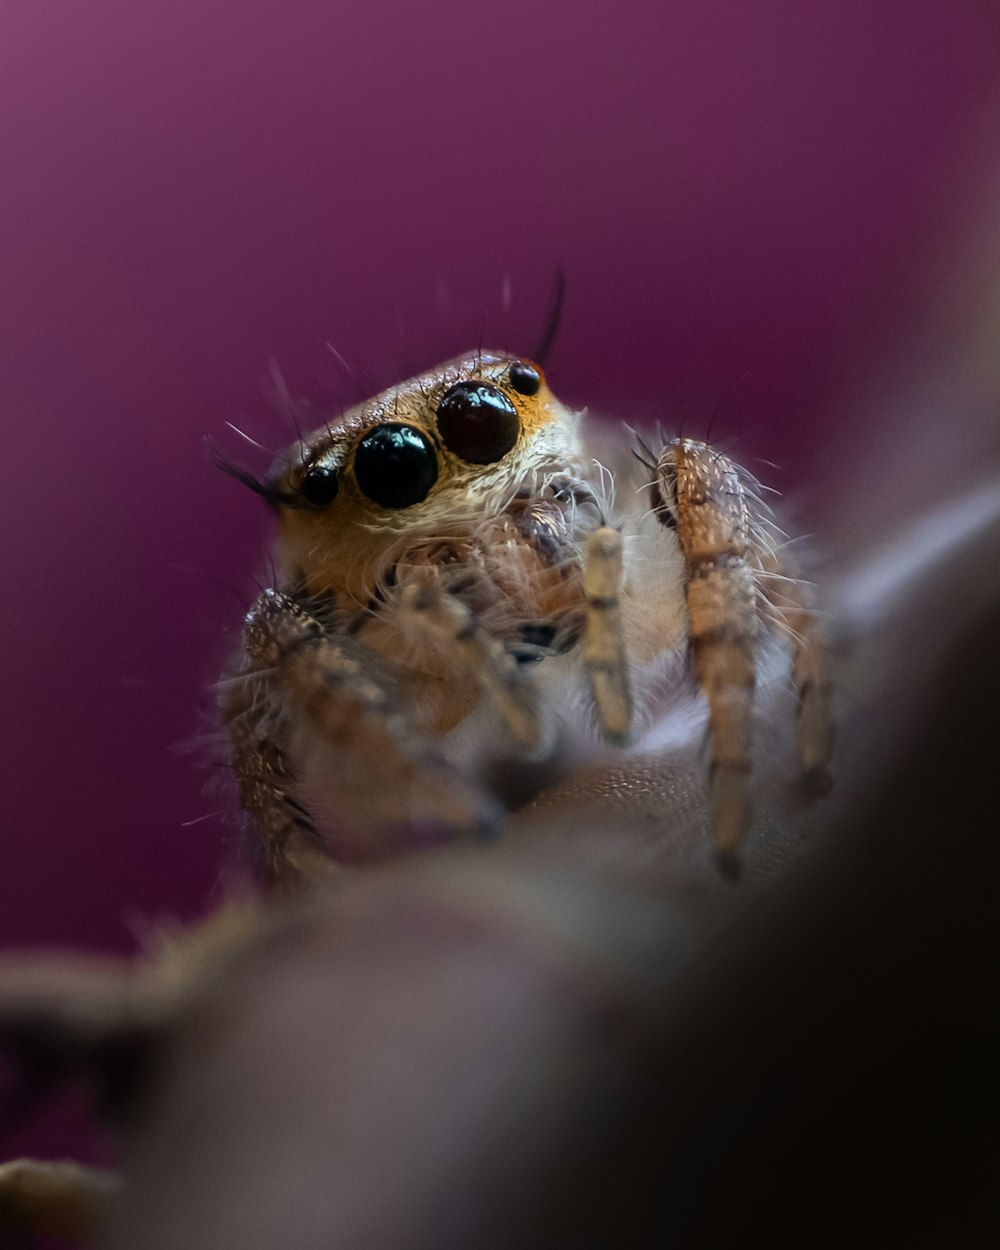 a spider with large eyes